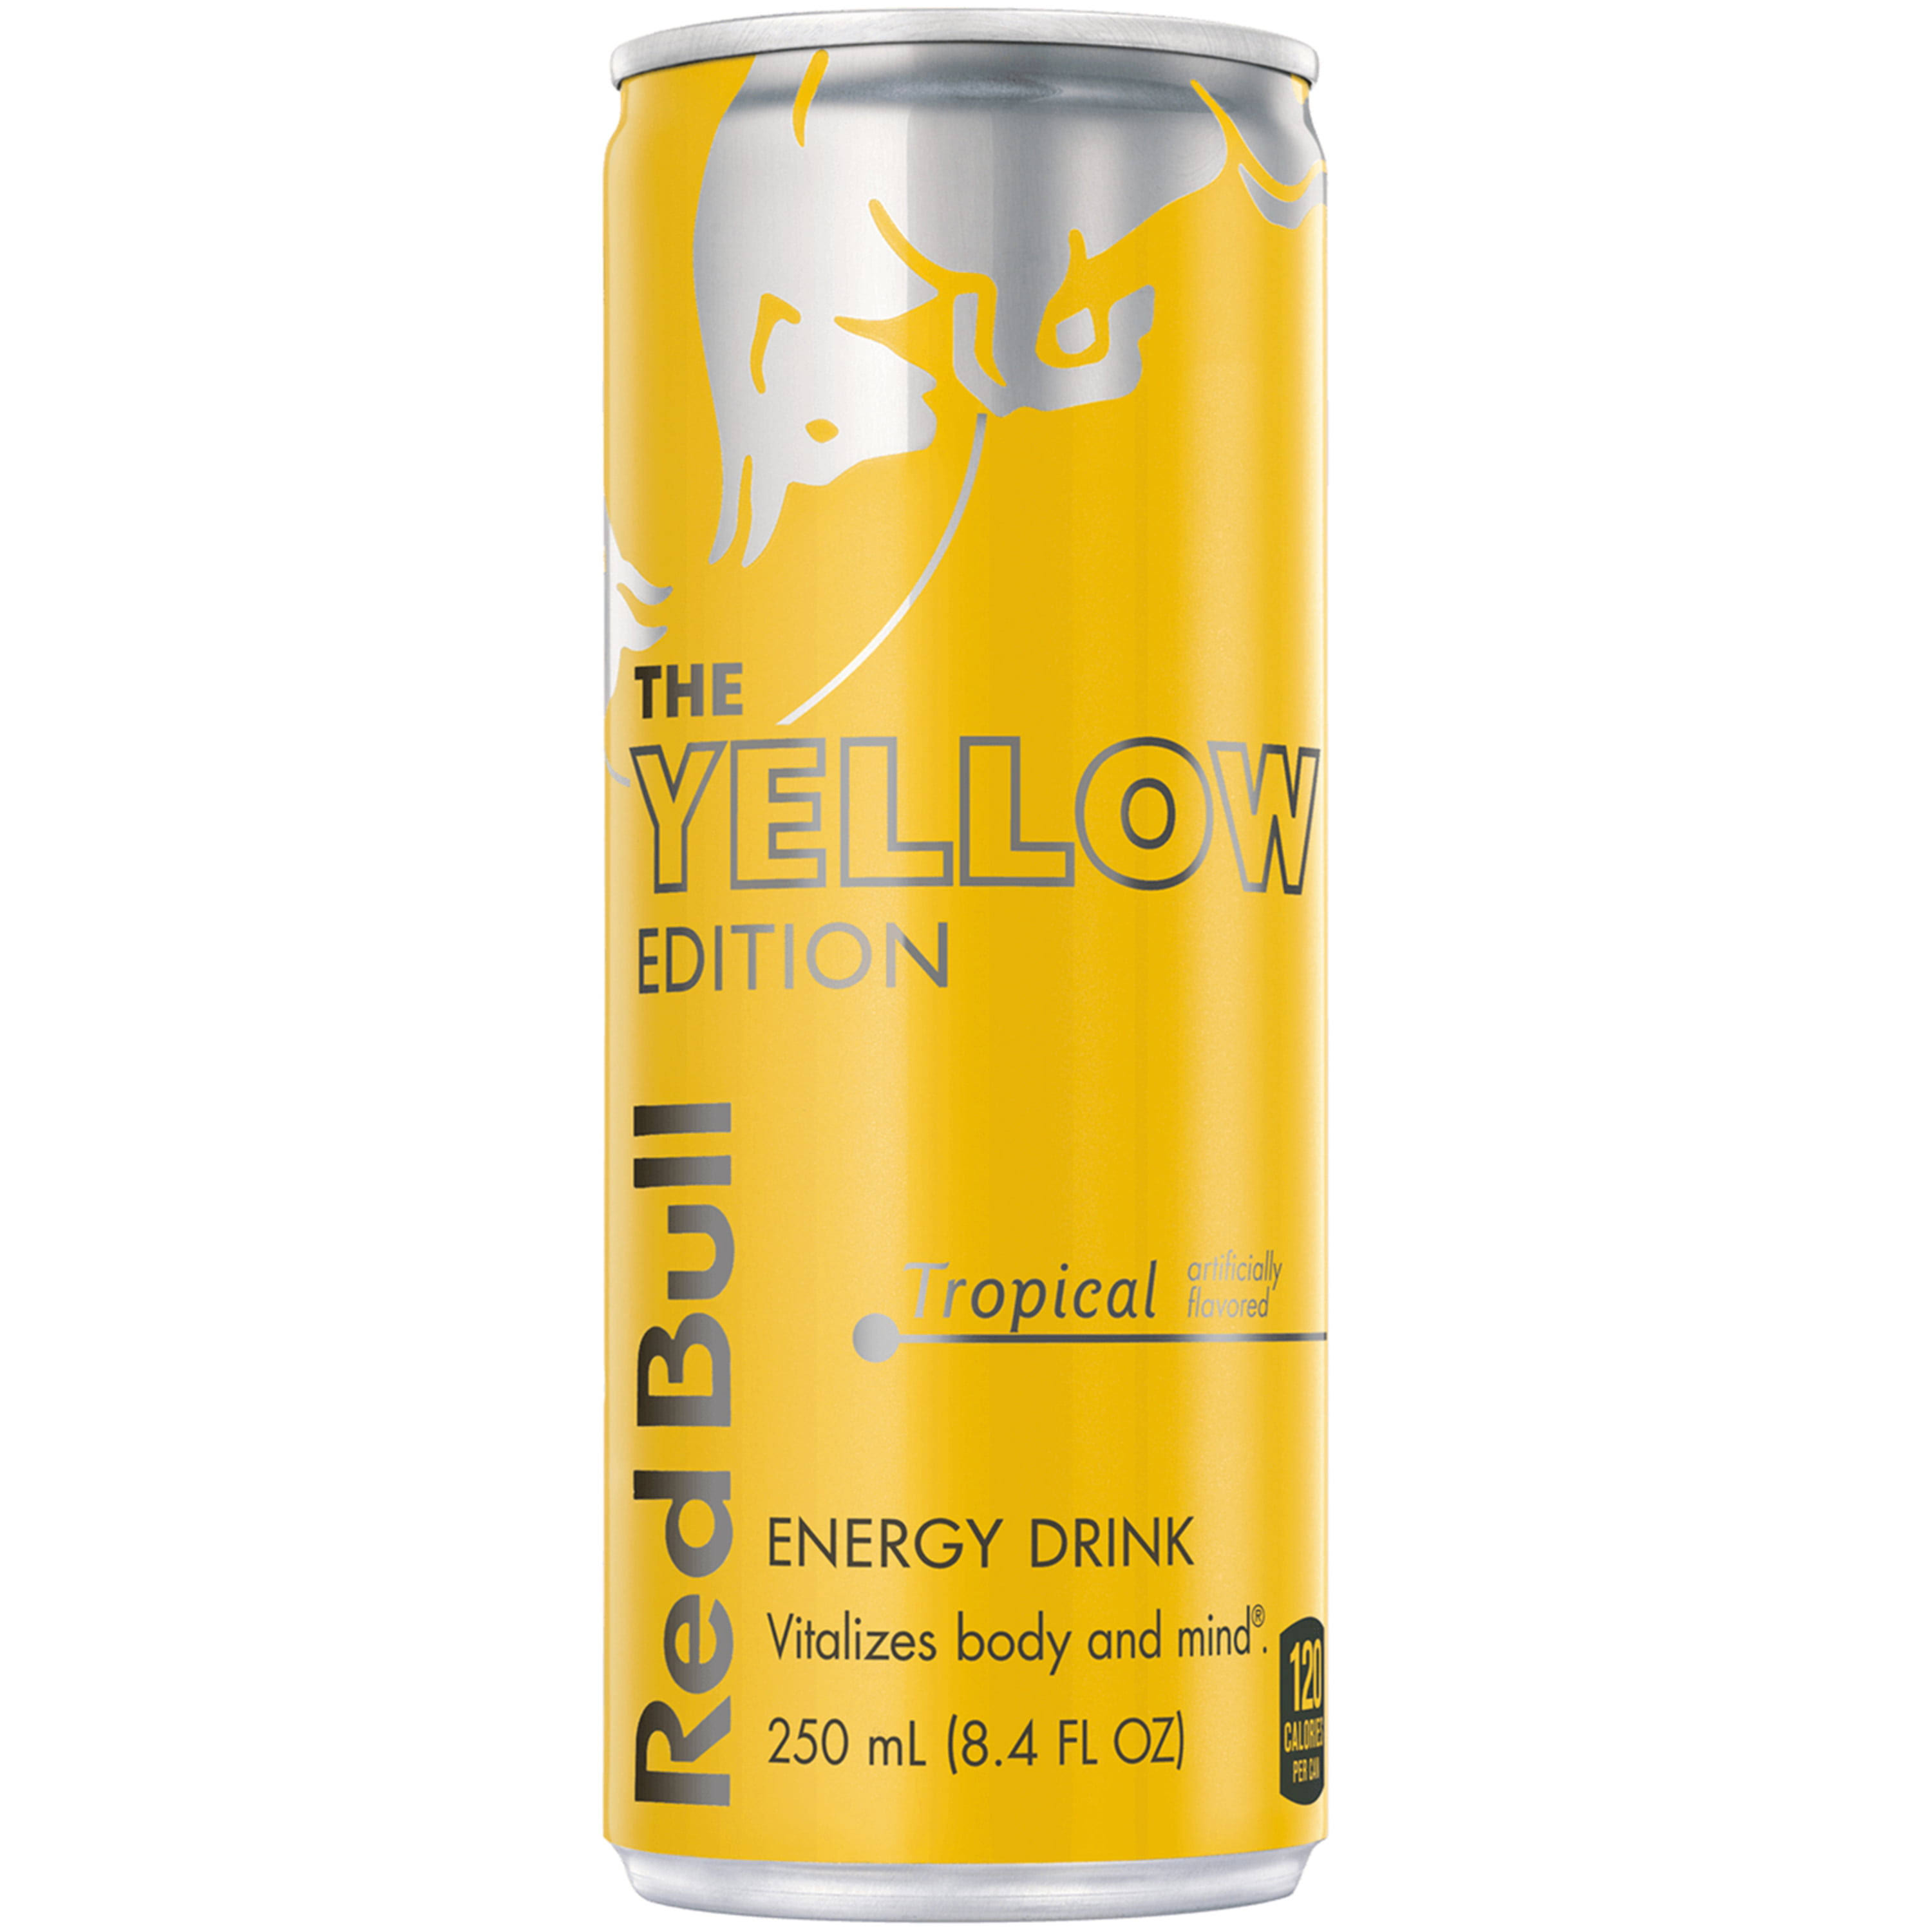 Red Bull The Yellow Edition Energy Drink - Tropical, 8.4oz